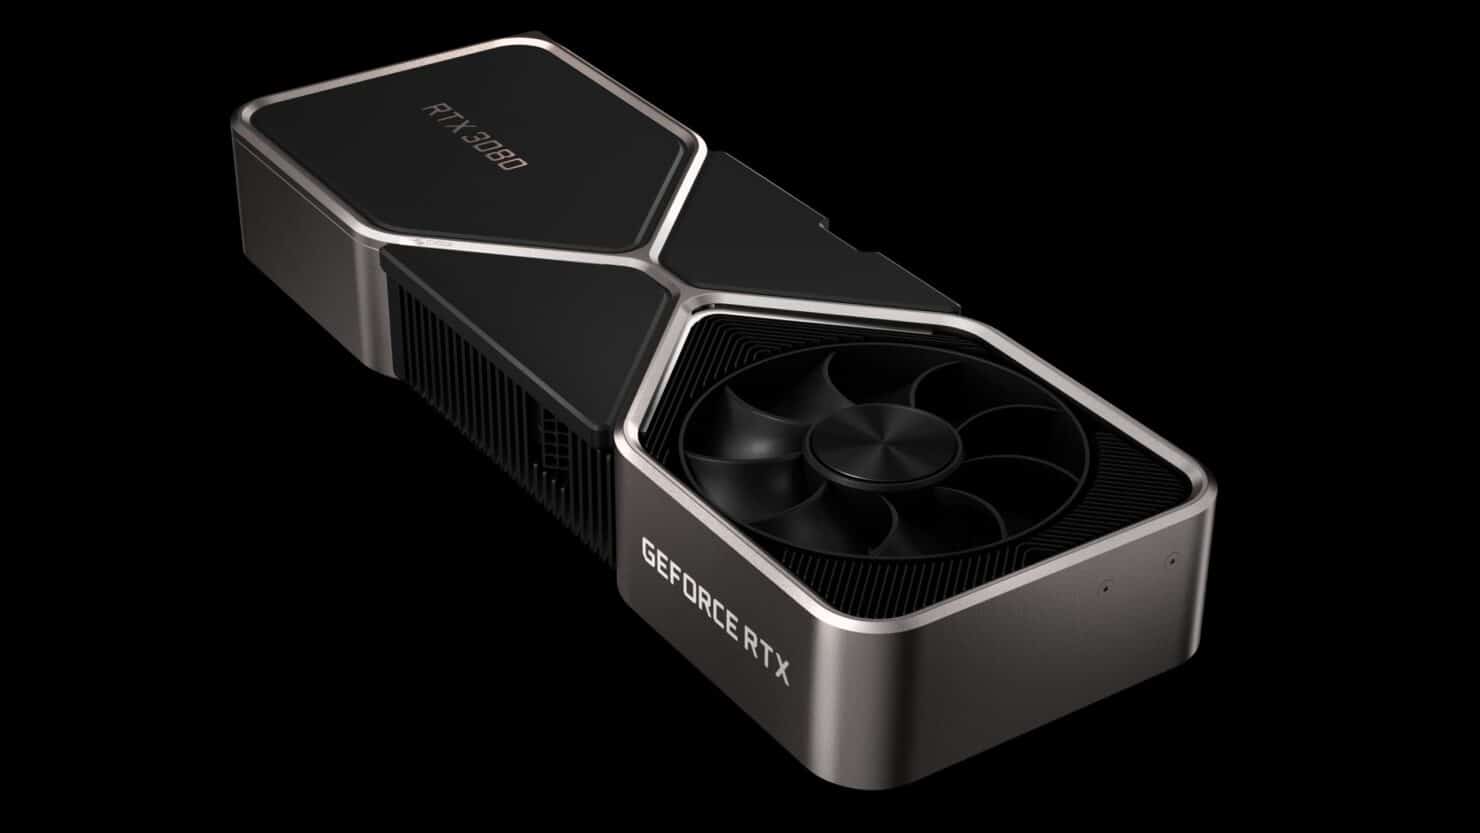 nvidia geforce rtx 3080 ti product gallery photo 003 scaled 1 1480x833 1